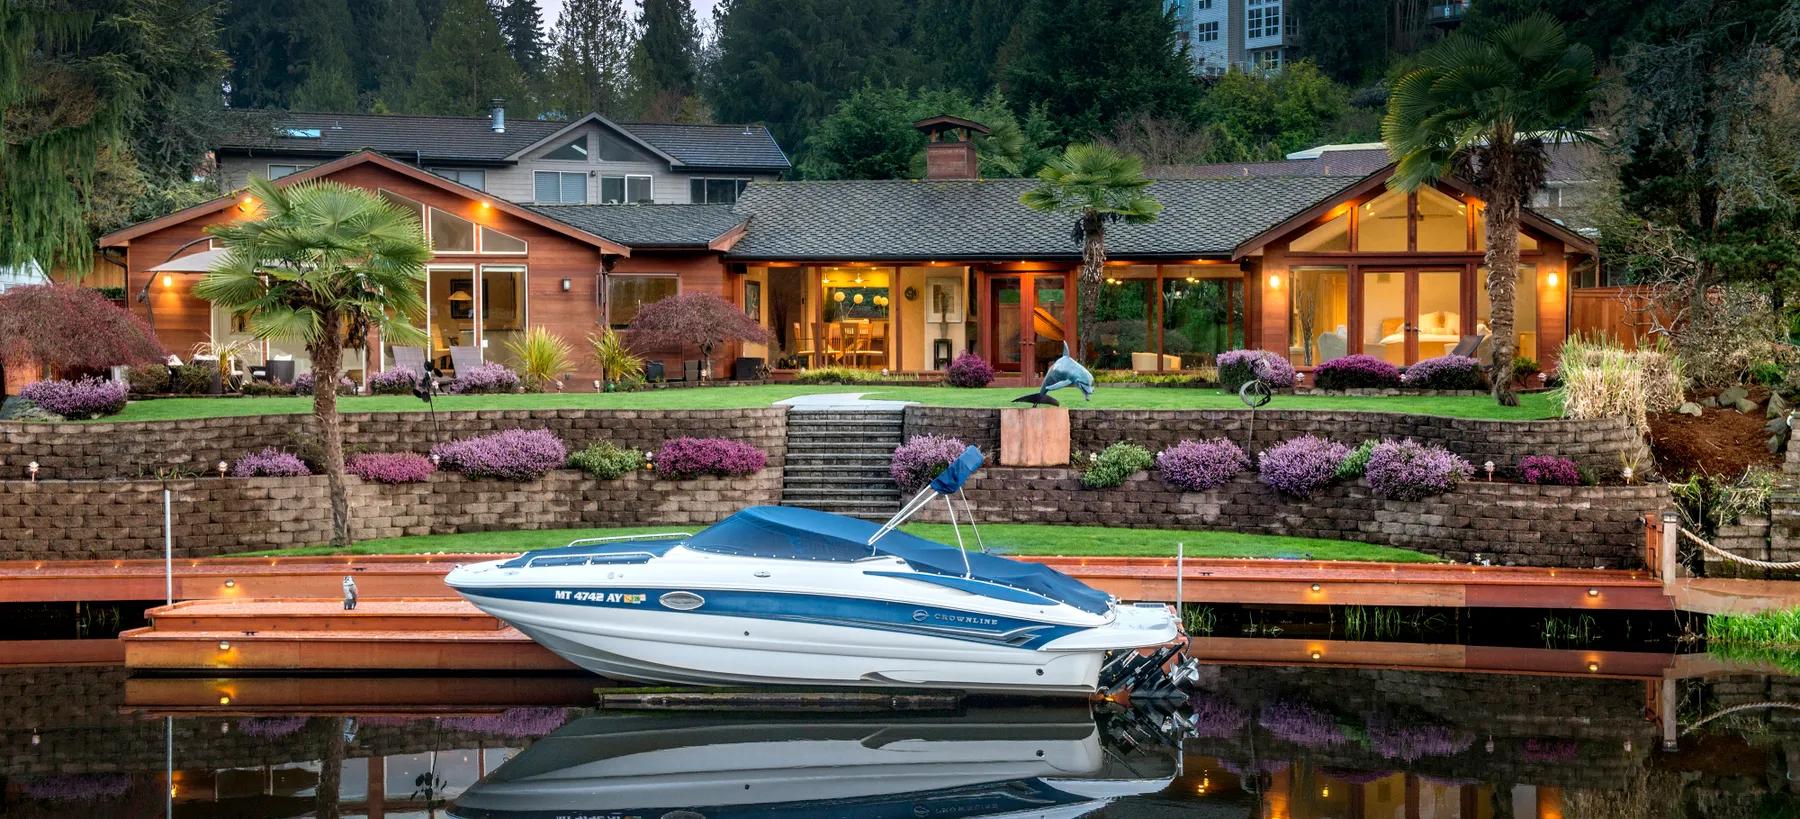 Find Luxury Real Estate in the Bothell Neighborhood | Corcoran Lifestyle Properties